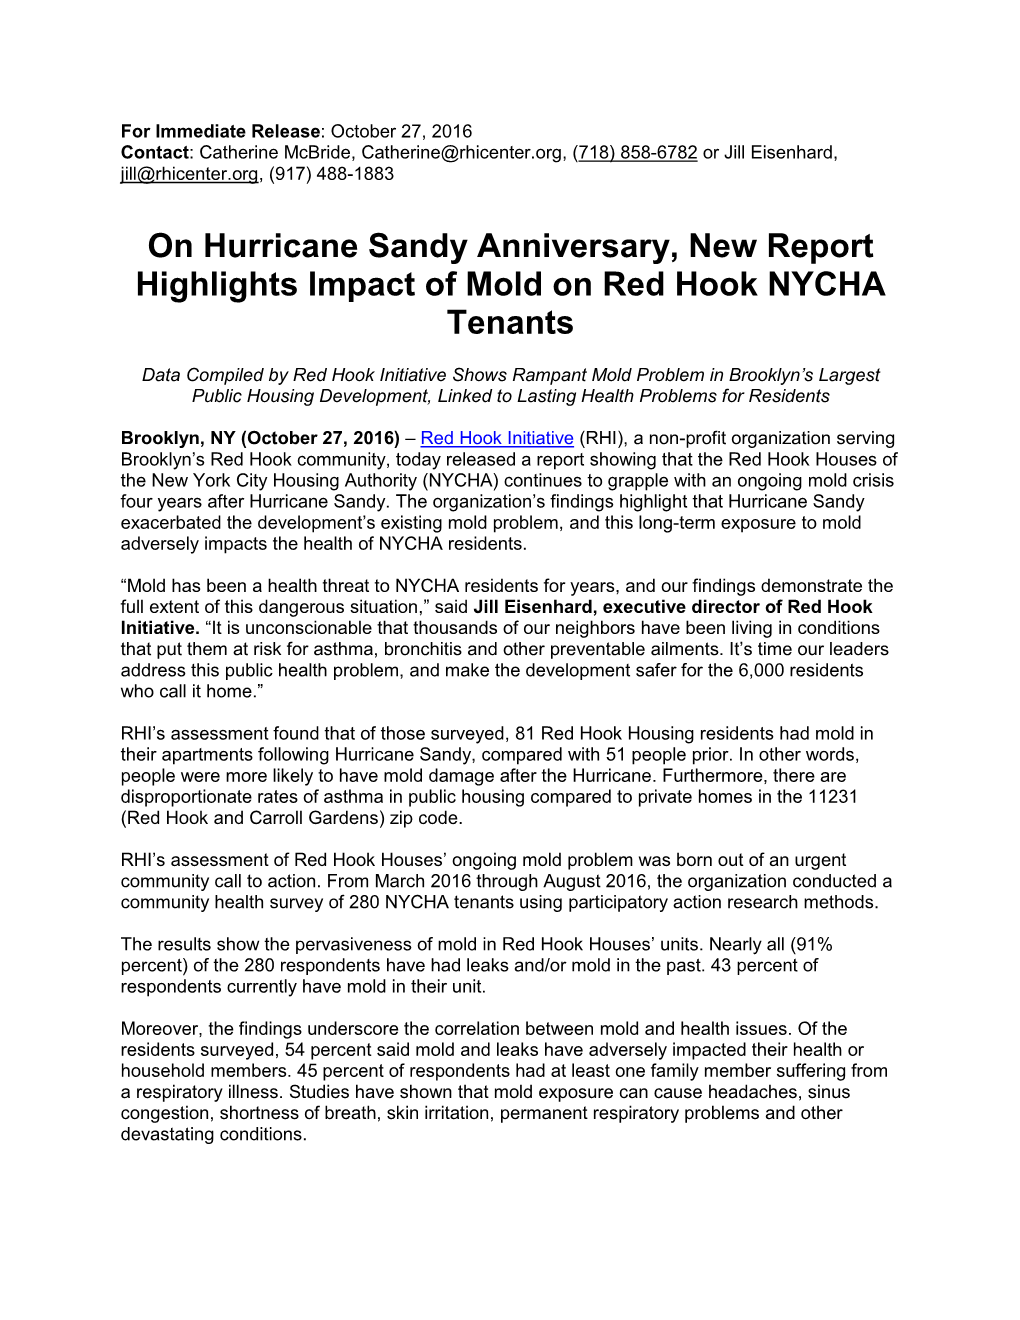 On Hurricane Sandy Anniversary, New Report Highlights Impact of Mold on Red Hook NYCHA Tenants